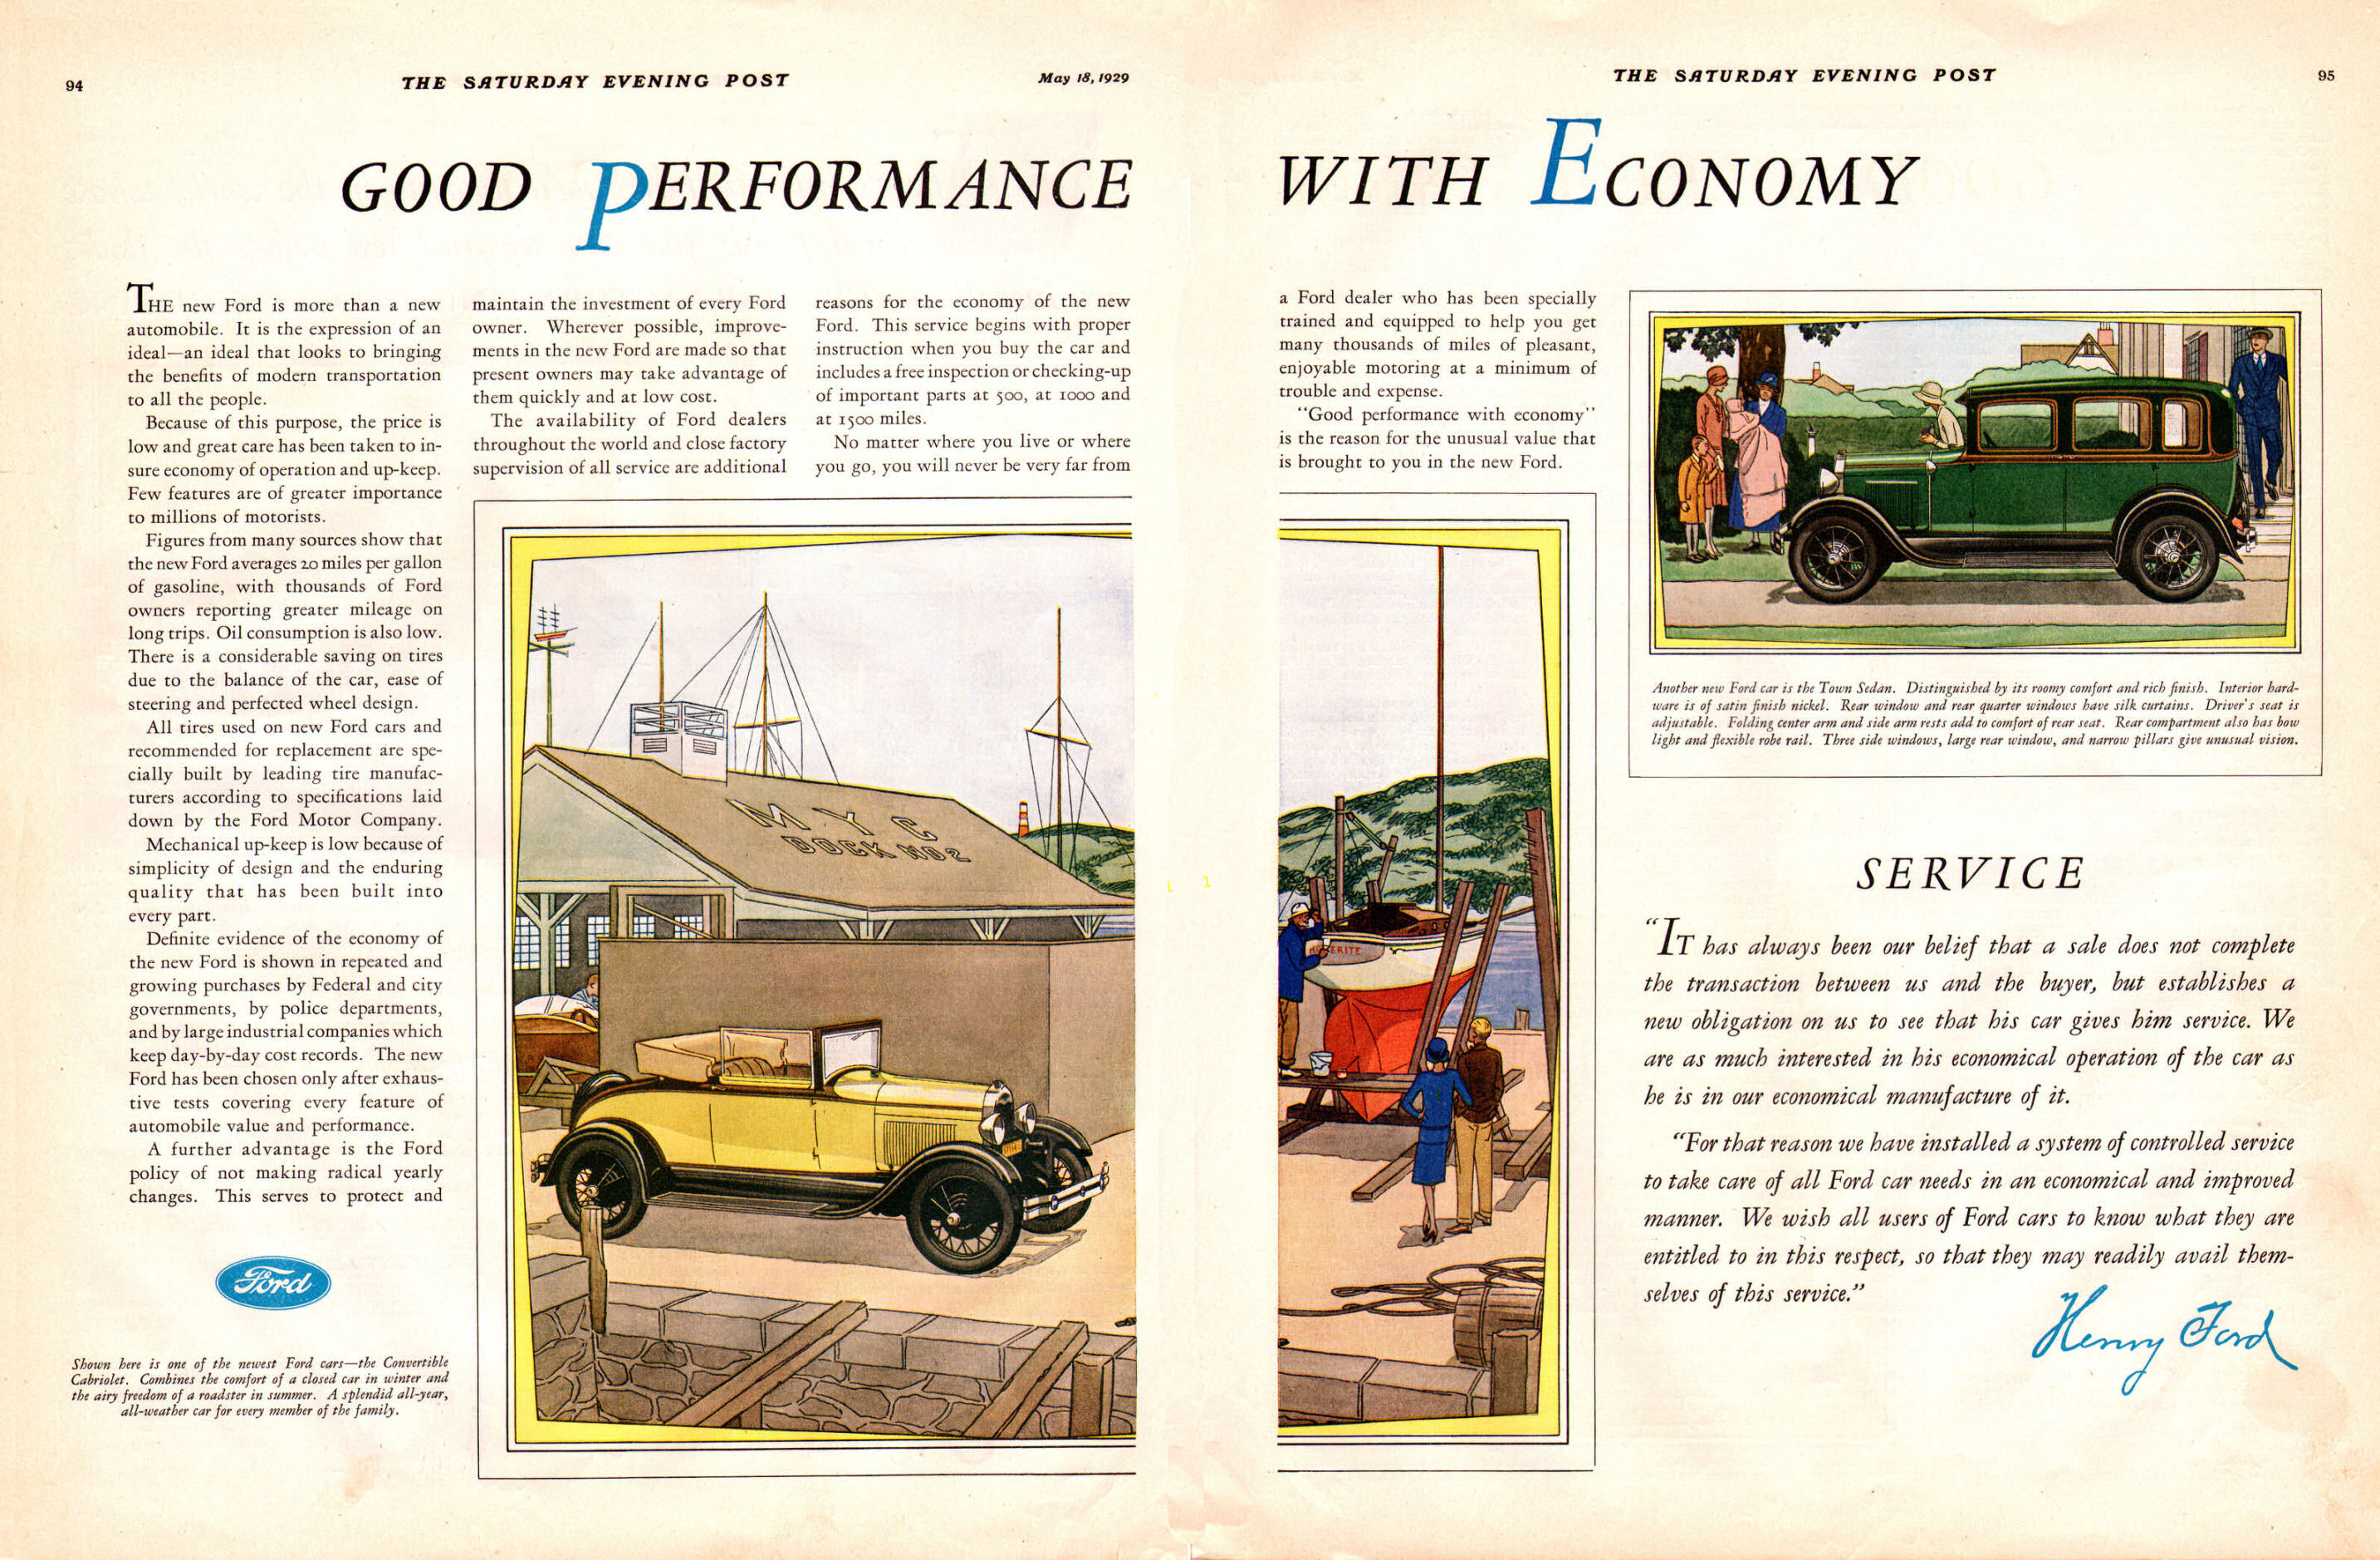 1929 Ford Auto Advertising